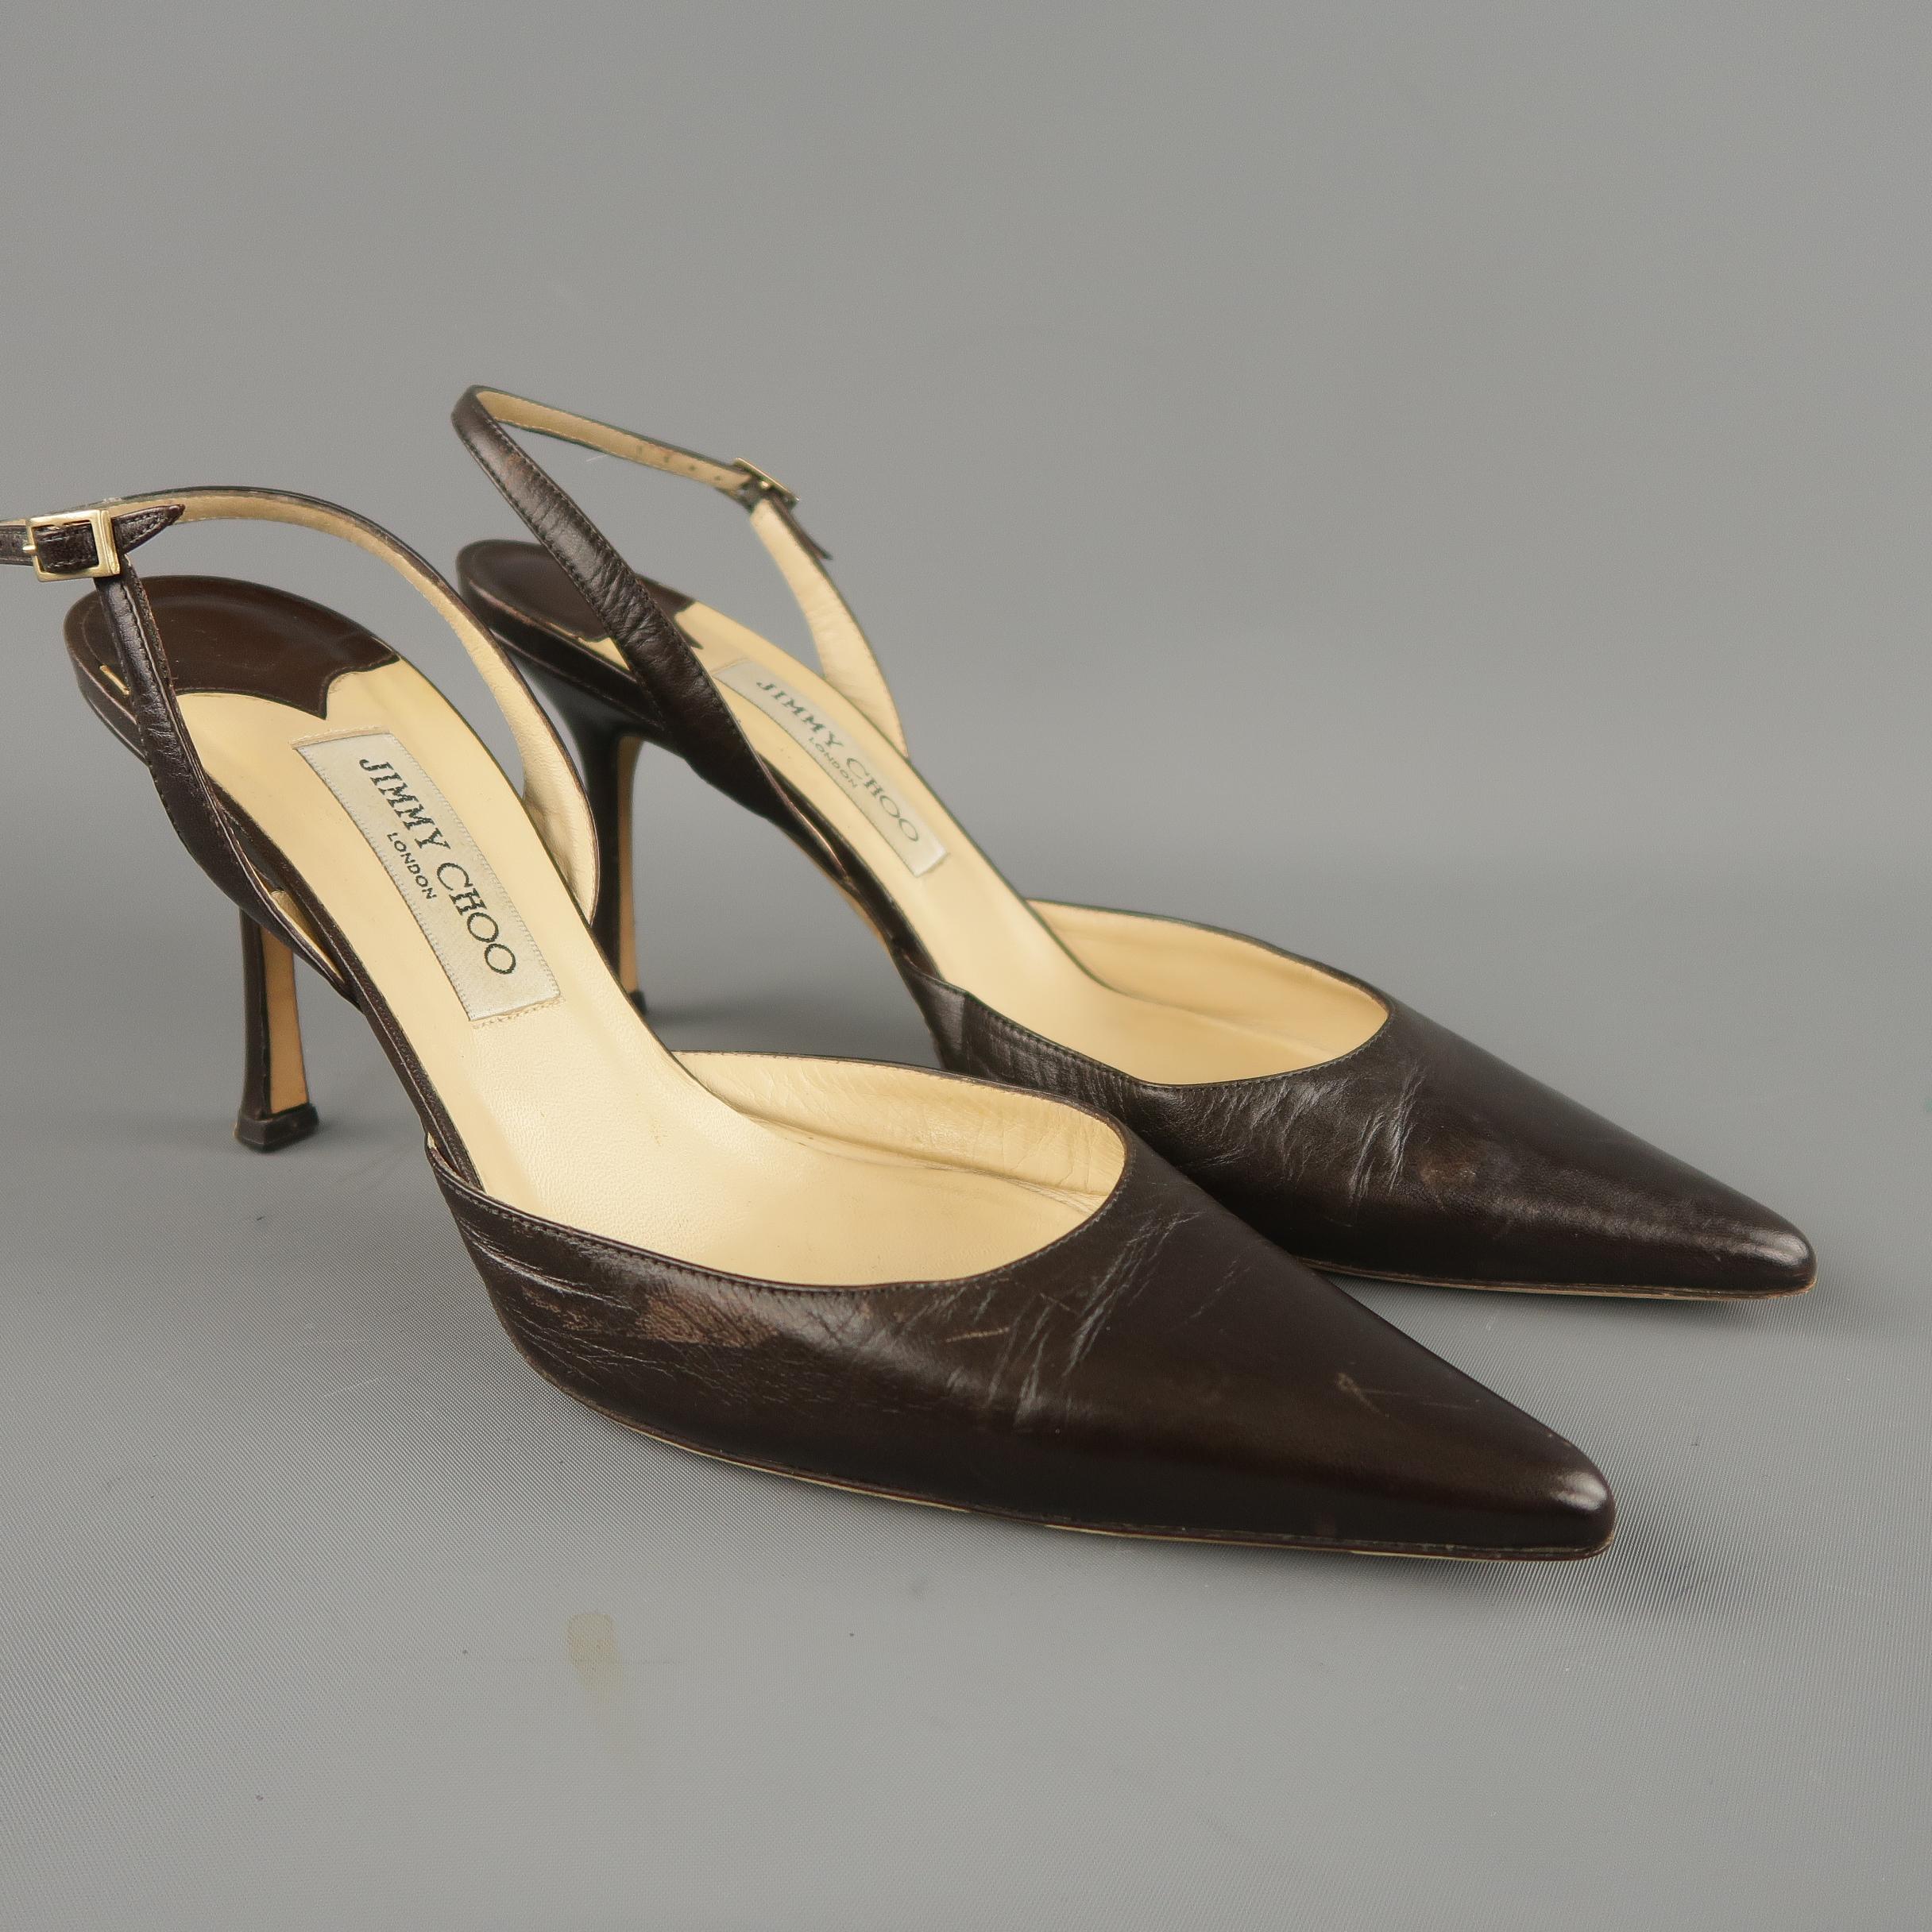 JIMMY CHOO pumps come in brown leather with a pointed toe, adjustable slingback strap, and covered stiletto heel. Wear throughout. Made in Italy.
 
Good Pre-Owned Condition.
Marked: IT 42
 
Measurements:
 
Heel: 4 in.